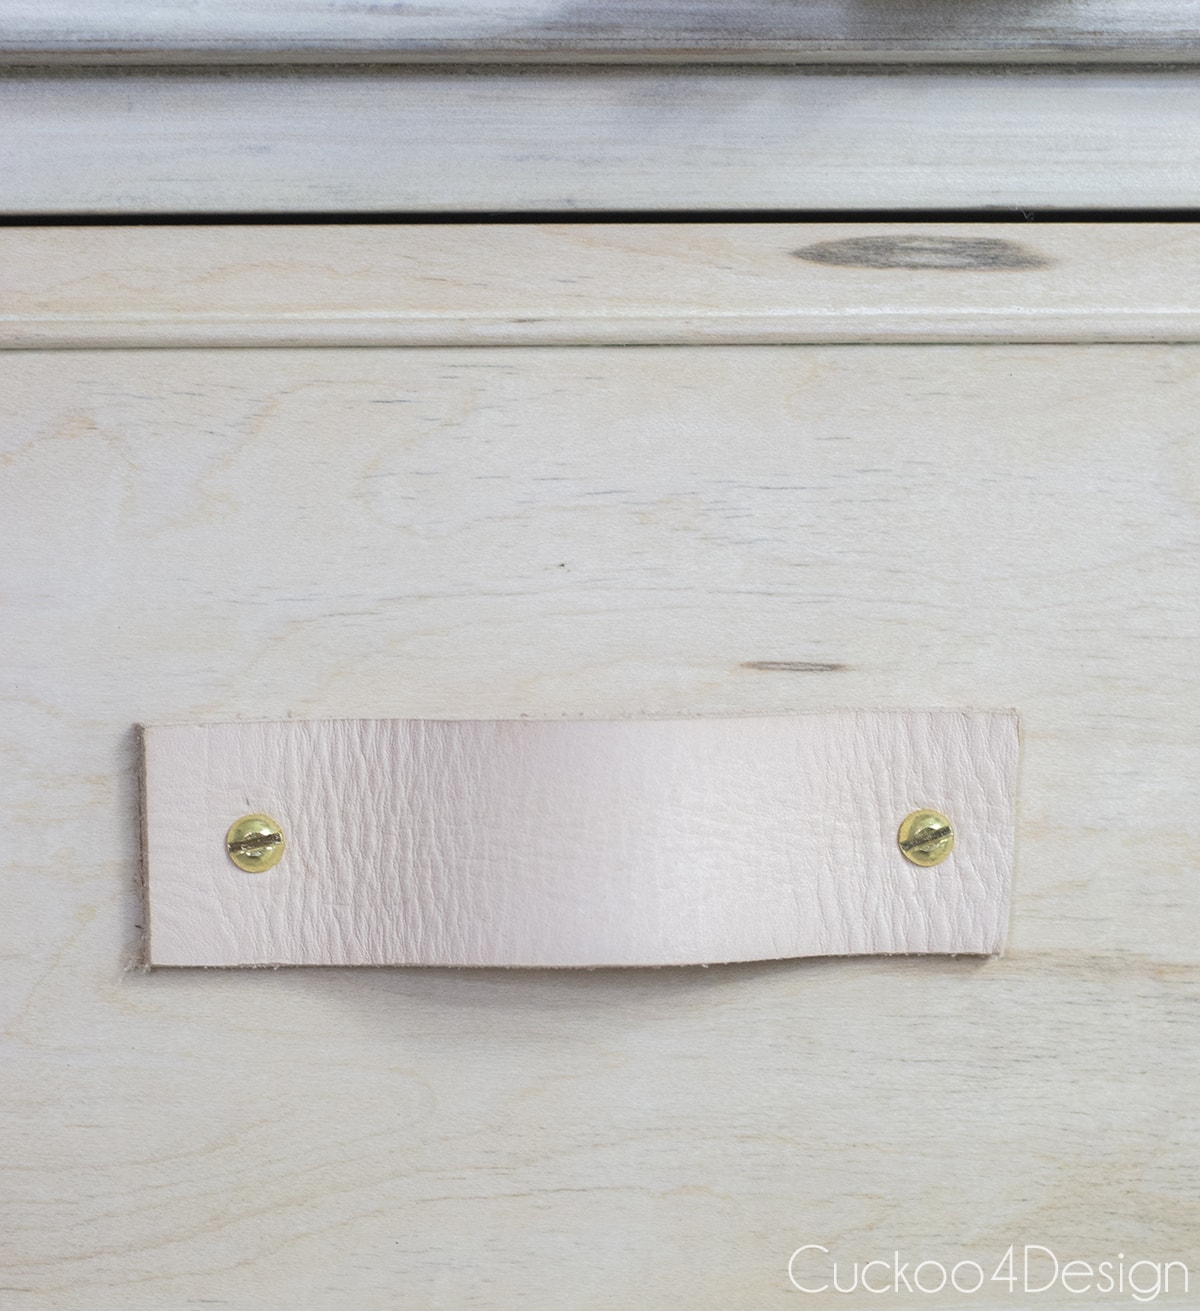 How to make leather drawer pulls